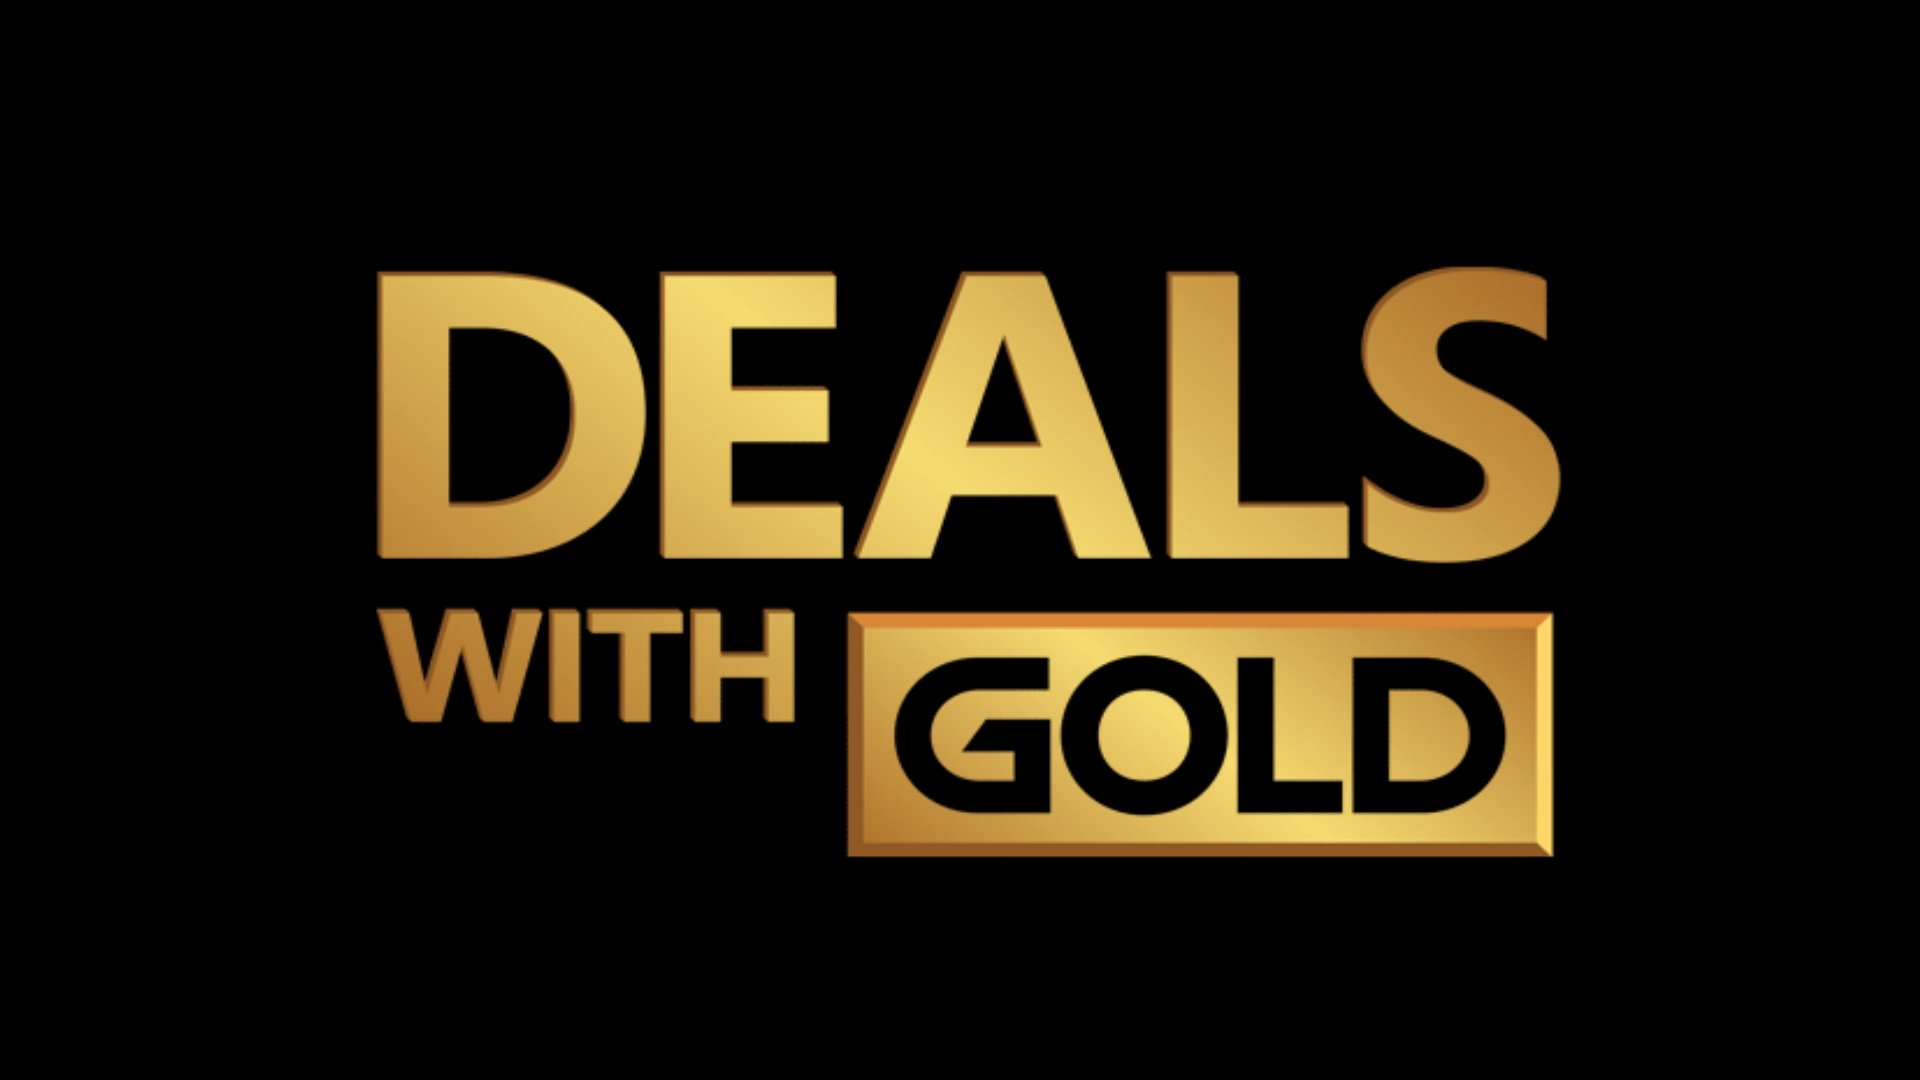 This Week's Deals With Gold And Spotlight Sale